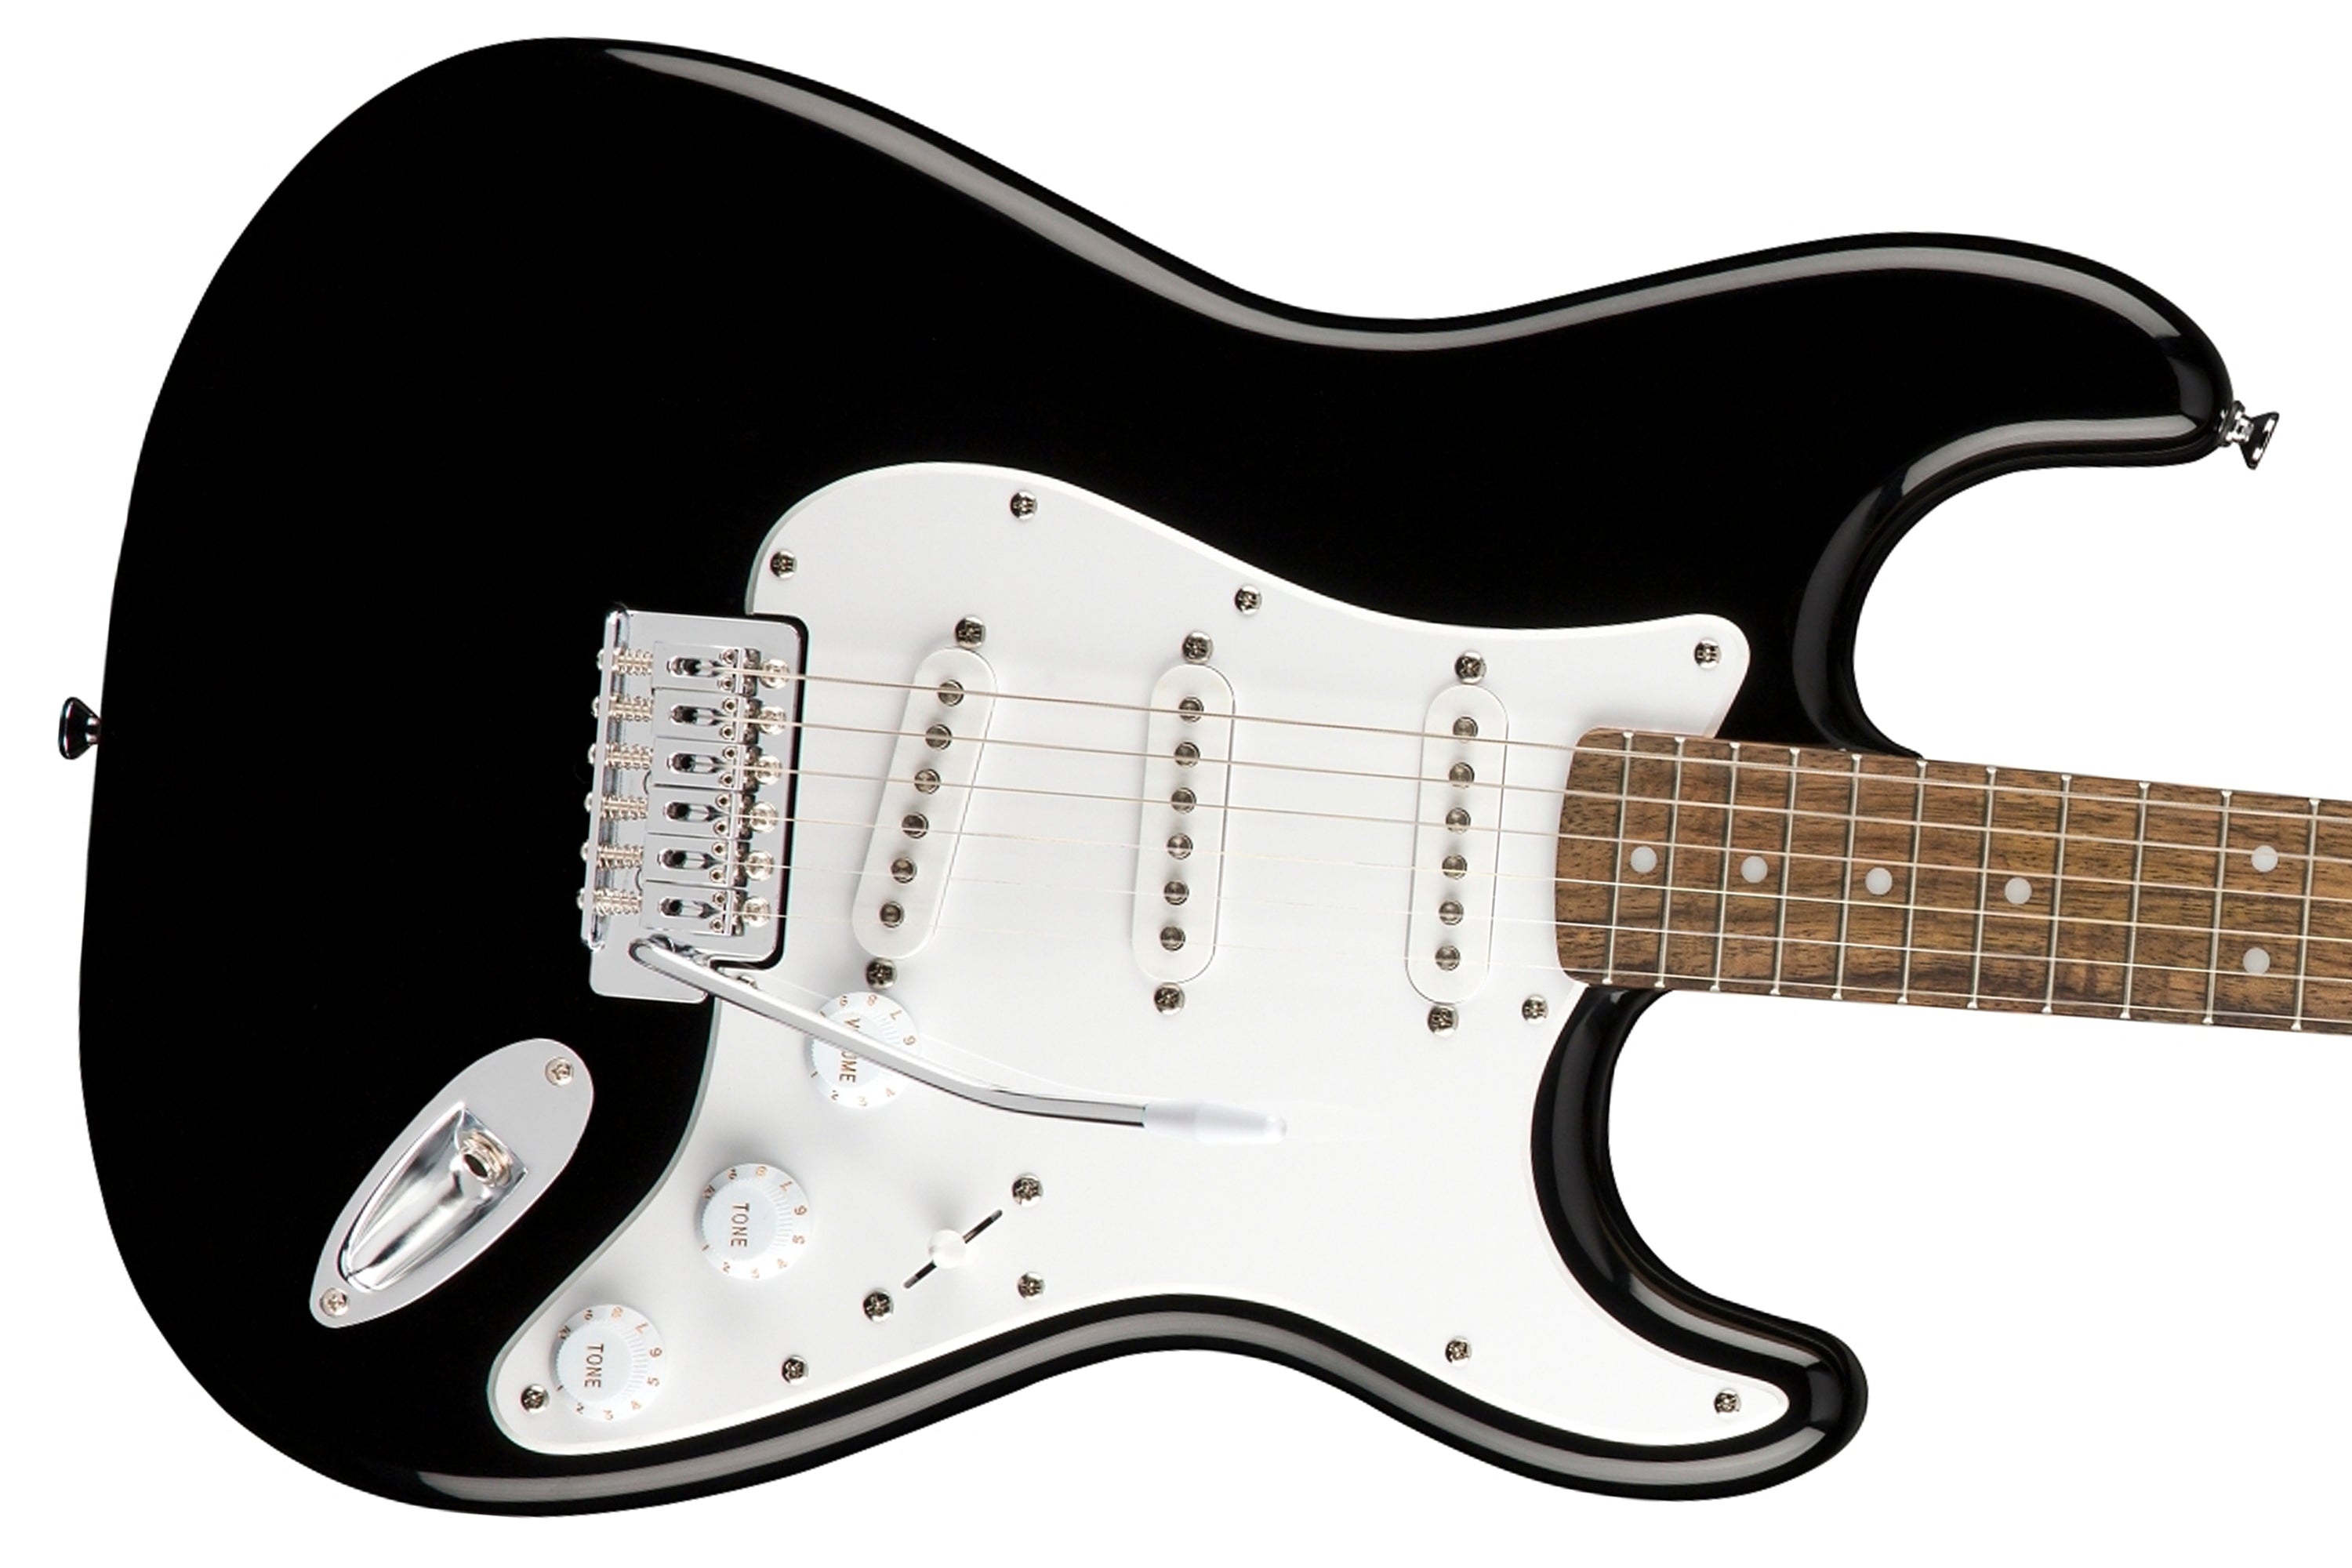 Squire By Fender Stratocaster Guitar Pack - Black